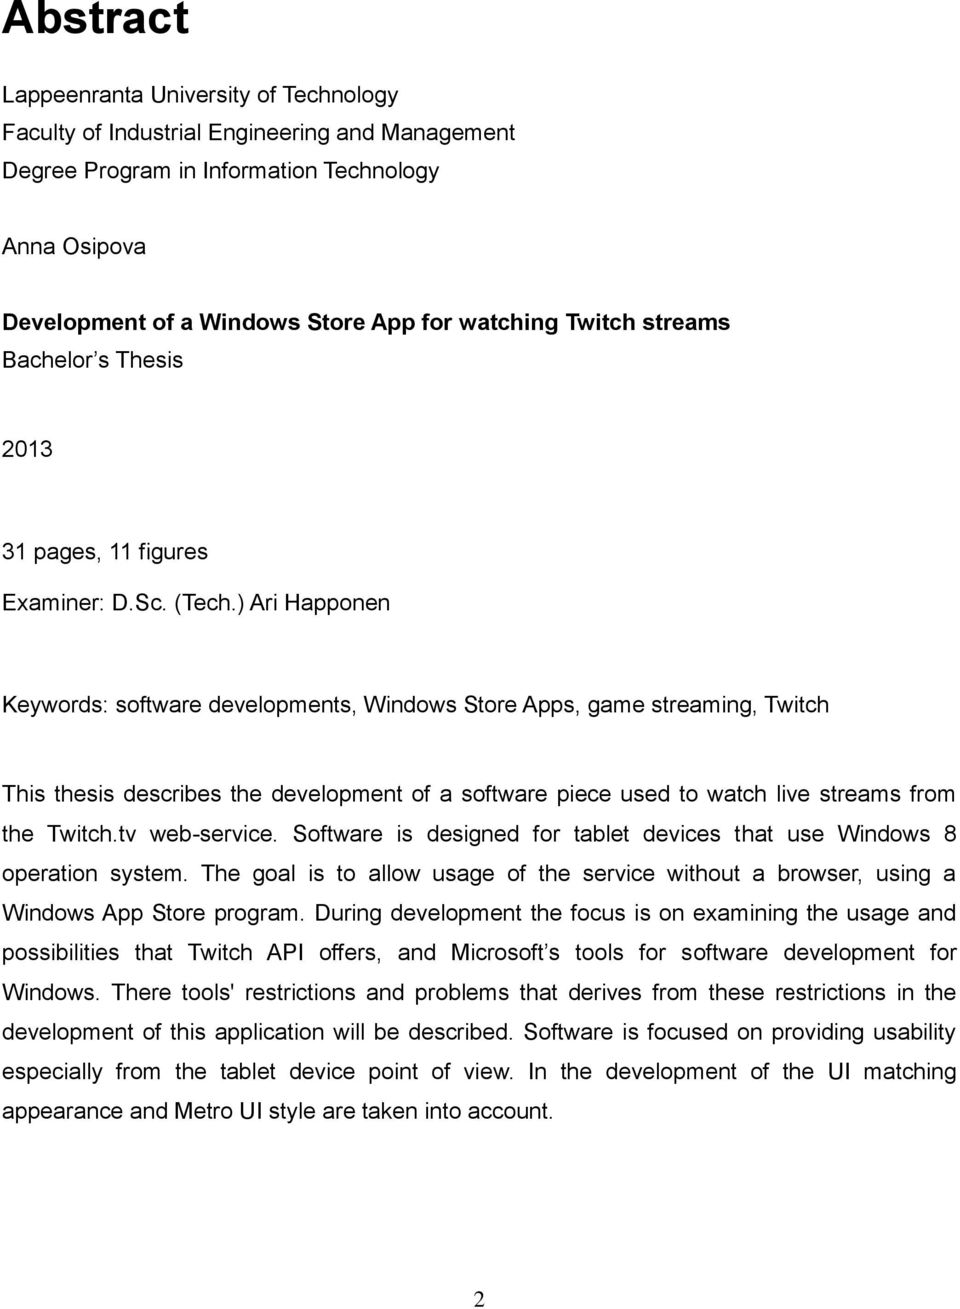 ) Ari Happonen Keywords: software developments, Windows Store Apps, game streaming, Twitch This thesis describes the development of a software piece used to watch live streams from the Twitch.